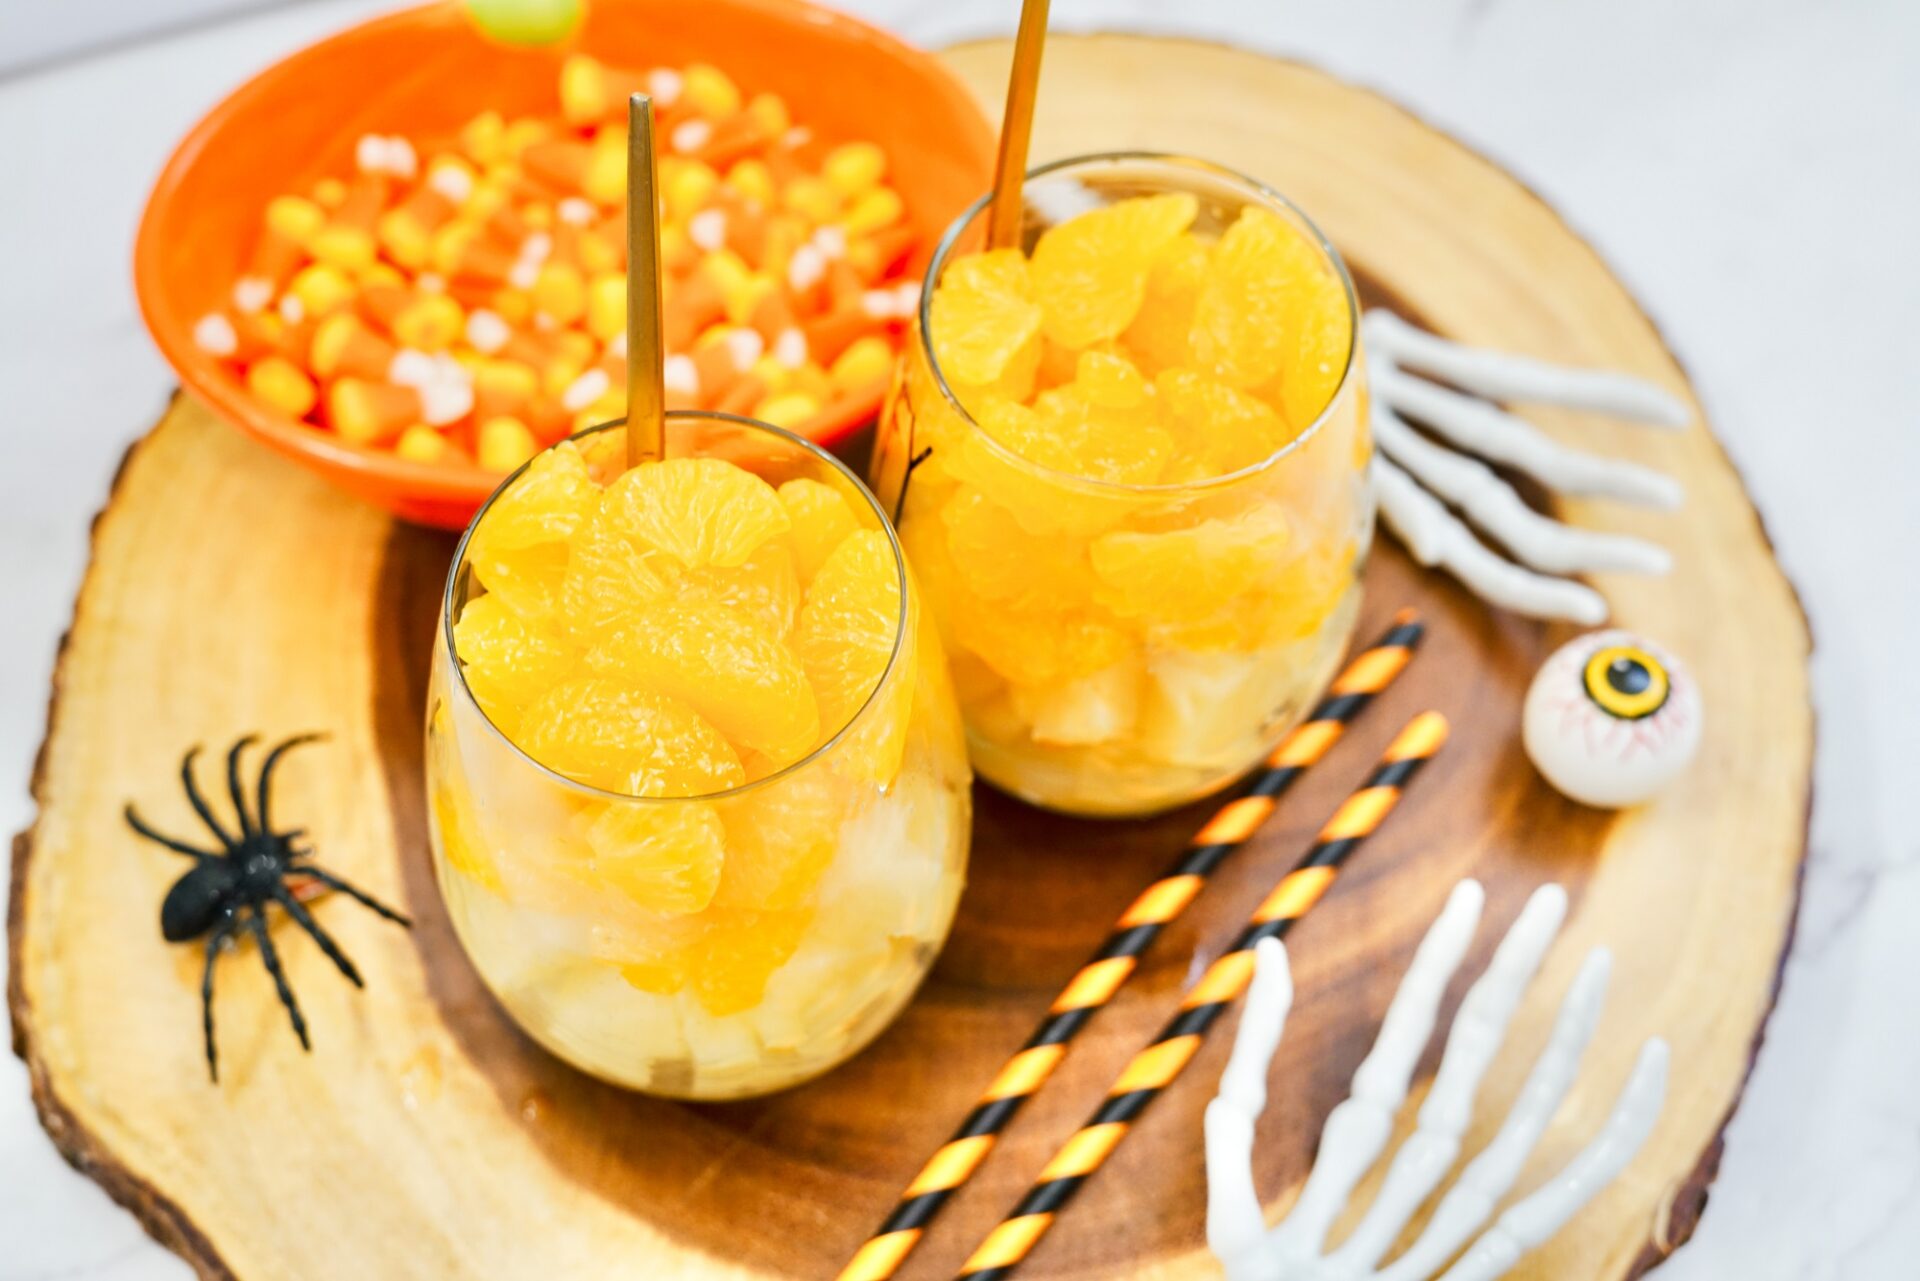 Adding orange slices to glasses with pineapple chunks.